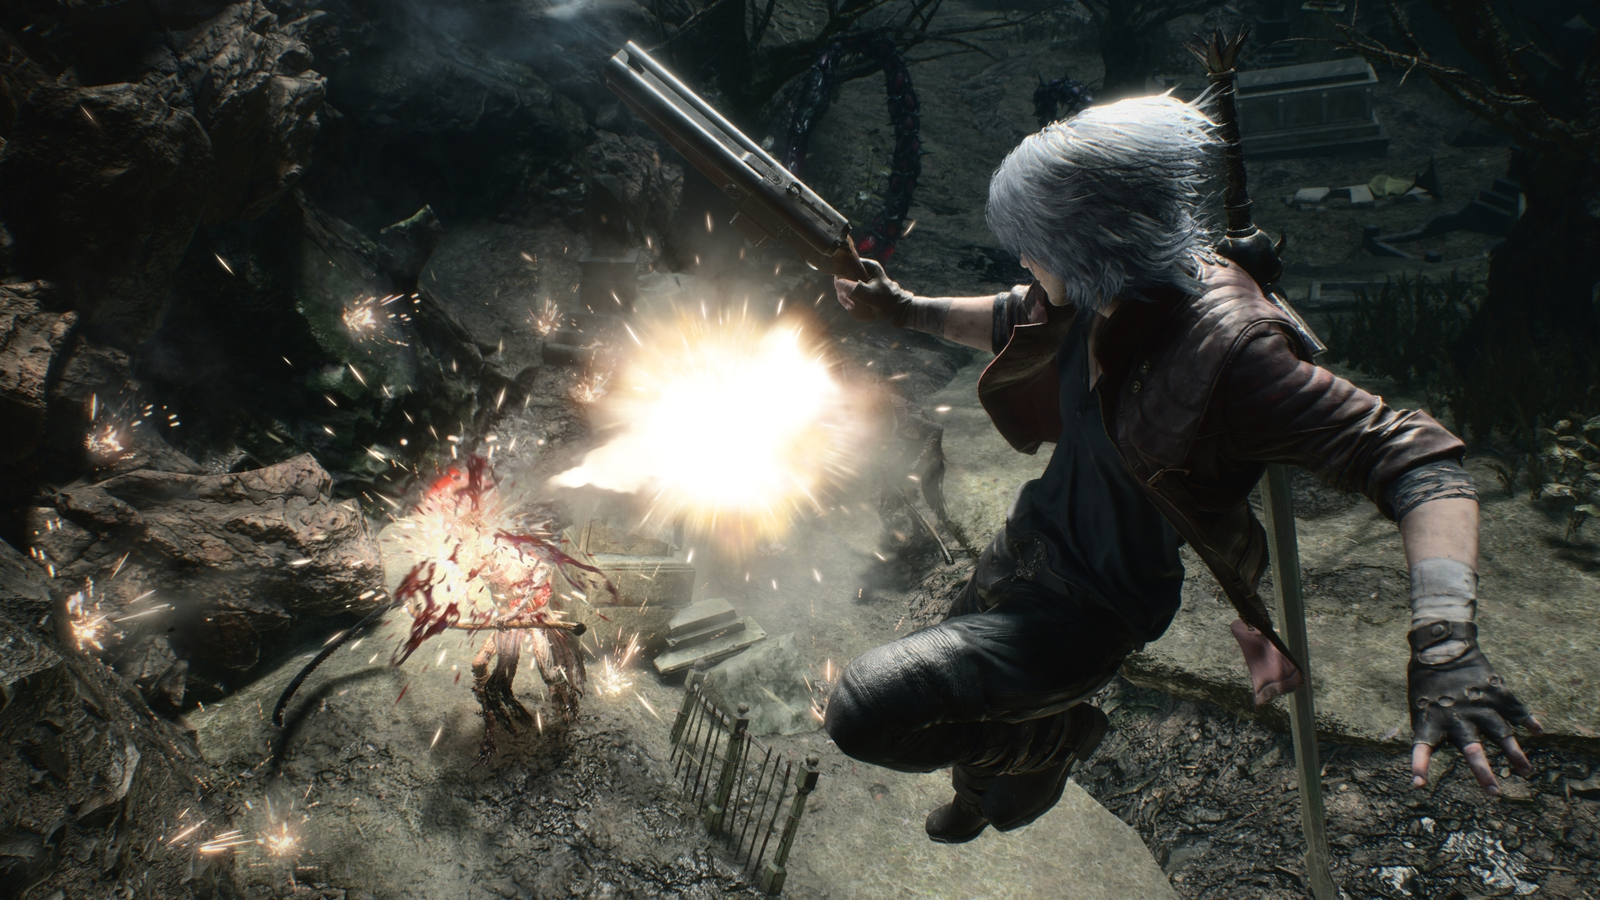 Devil May Cry 4 Special Edition available to pre-order and pre